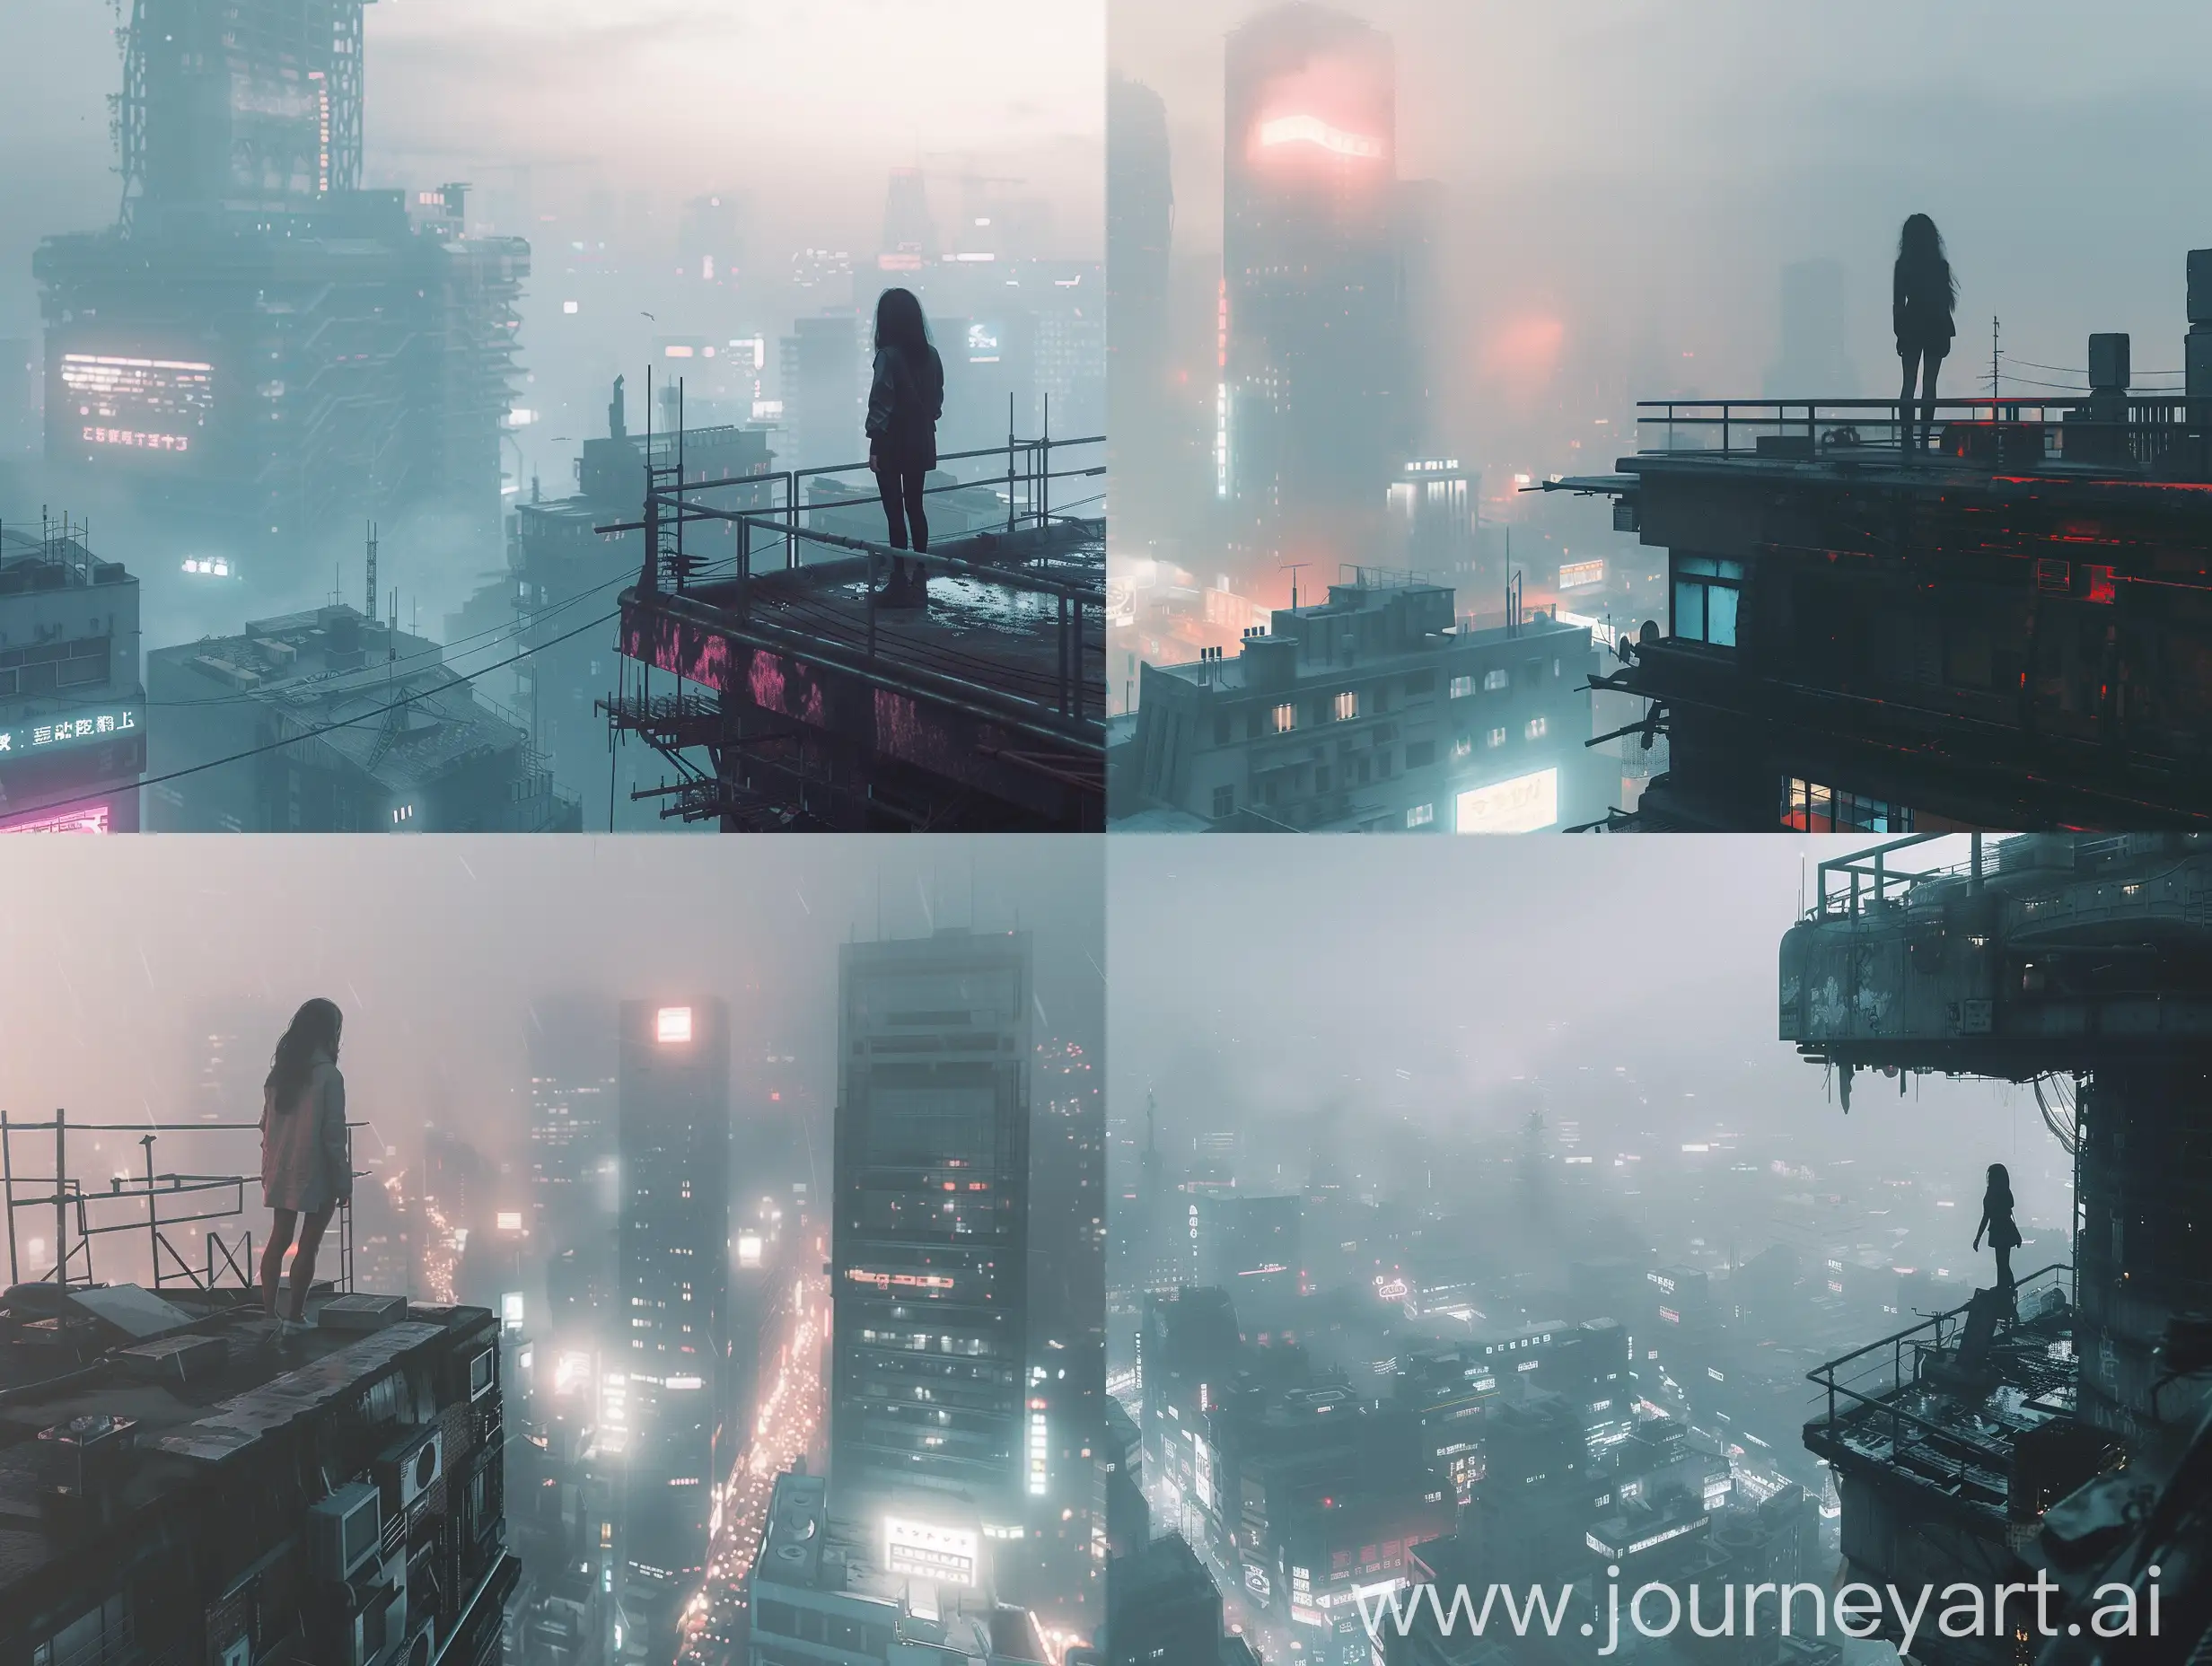 A picture capturing the viewpoint of a woman standing on the rooftop of a building while looking at the city, with soft lighting, day time, in a bustling futuristic city environment. The image shows a full view of the city and has a raw and relaxing style. foggy, dystopian,
